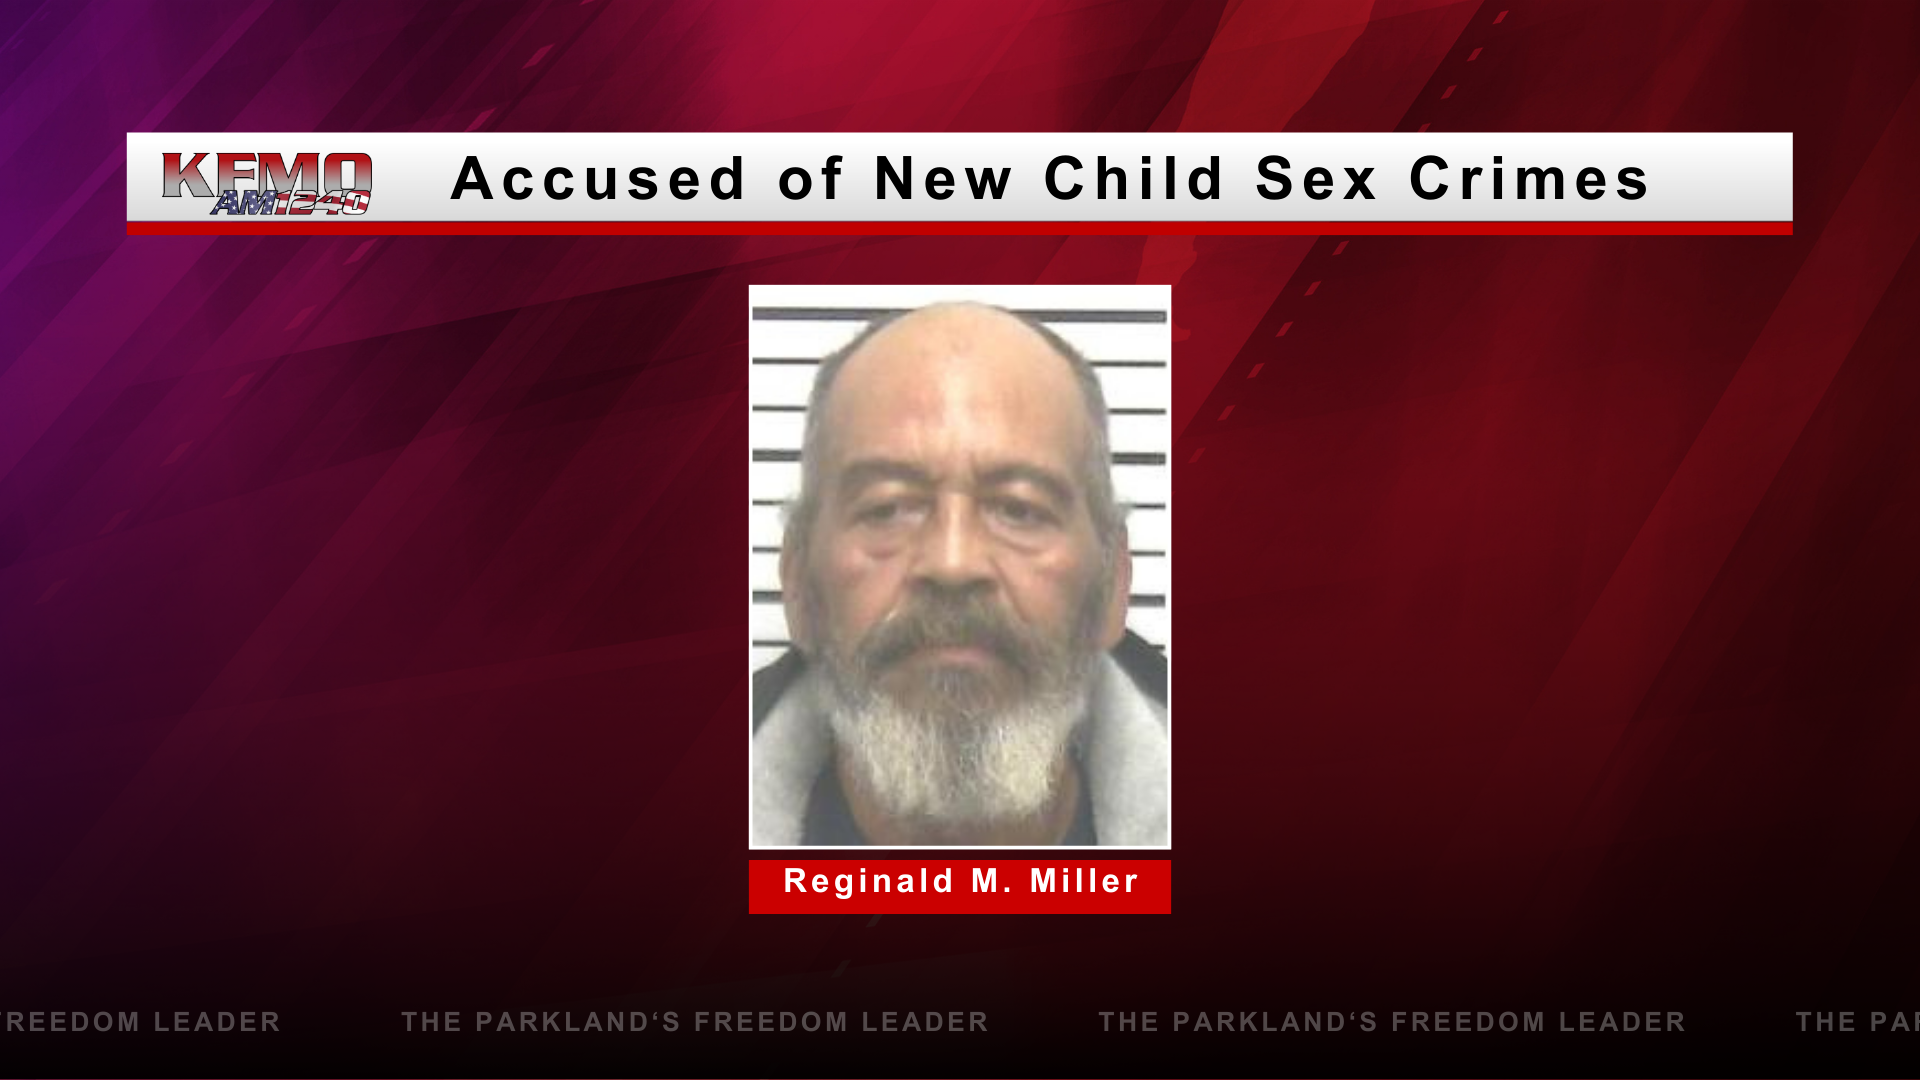 St. Francois County Sex Offender Accused of New Child Sex Crimes